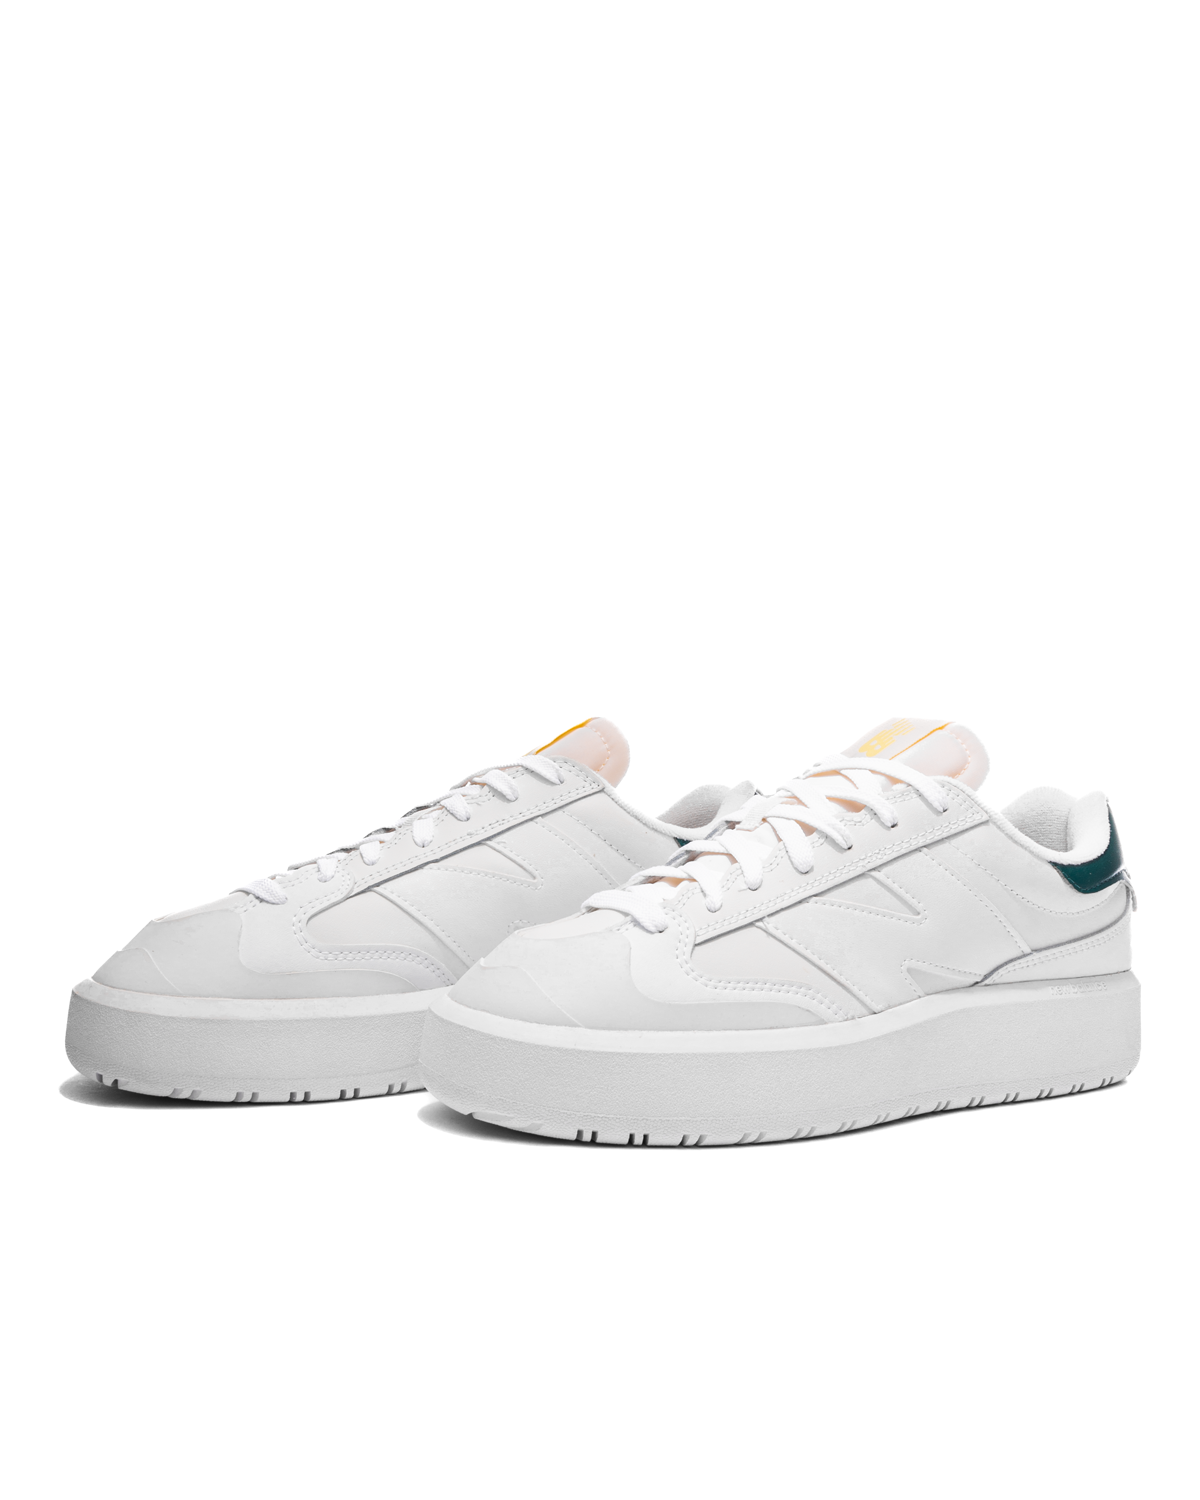 CT302 White/Vintage Teal/Maize